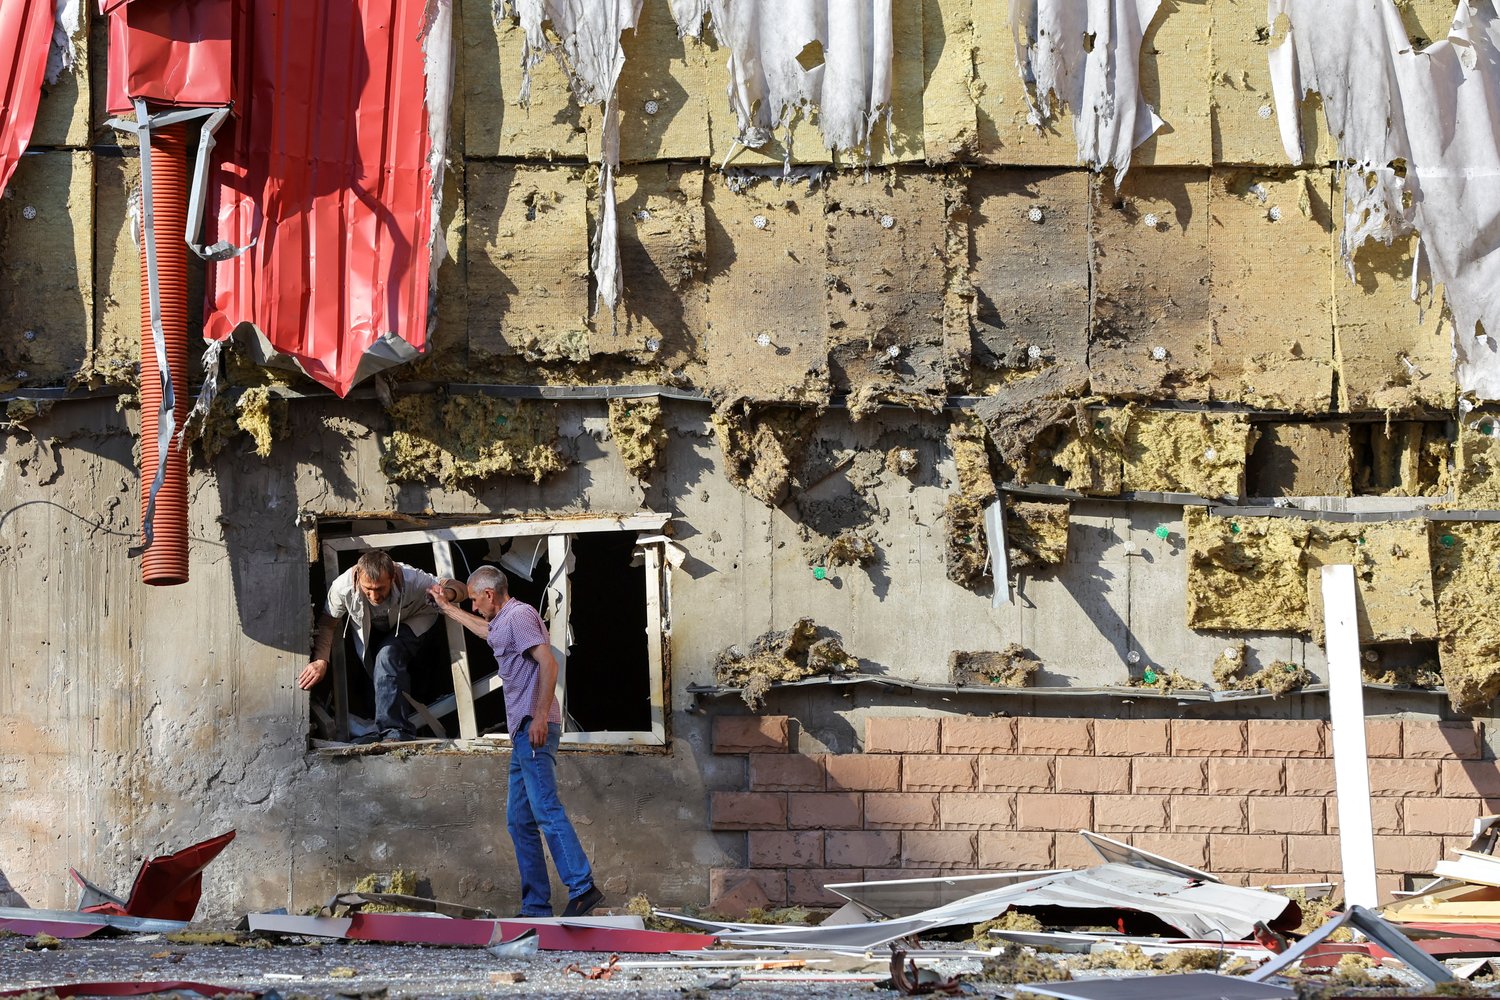 A man gets out of a damaged residential building following recent shelling in the course of the Ukrainian-Russian conflict in Donetsk, Ukraine, June 20.